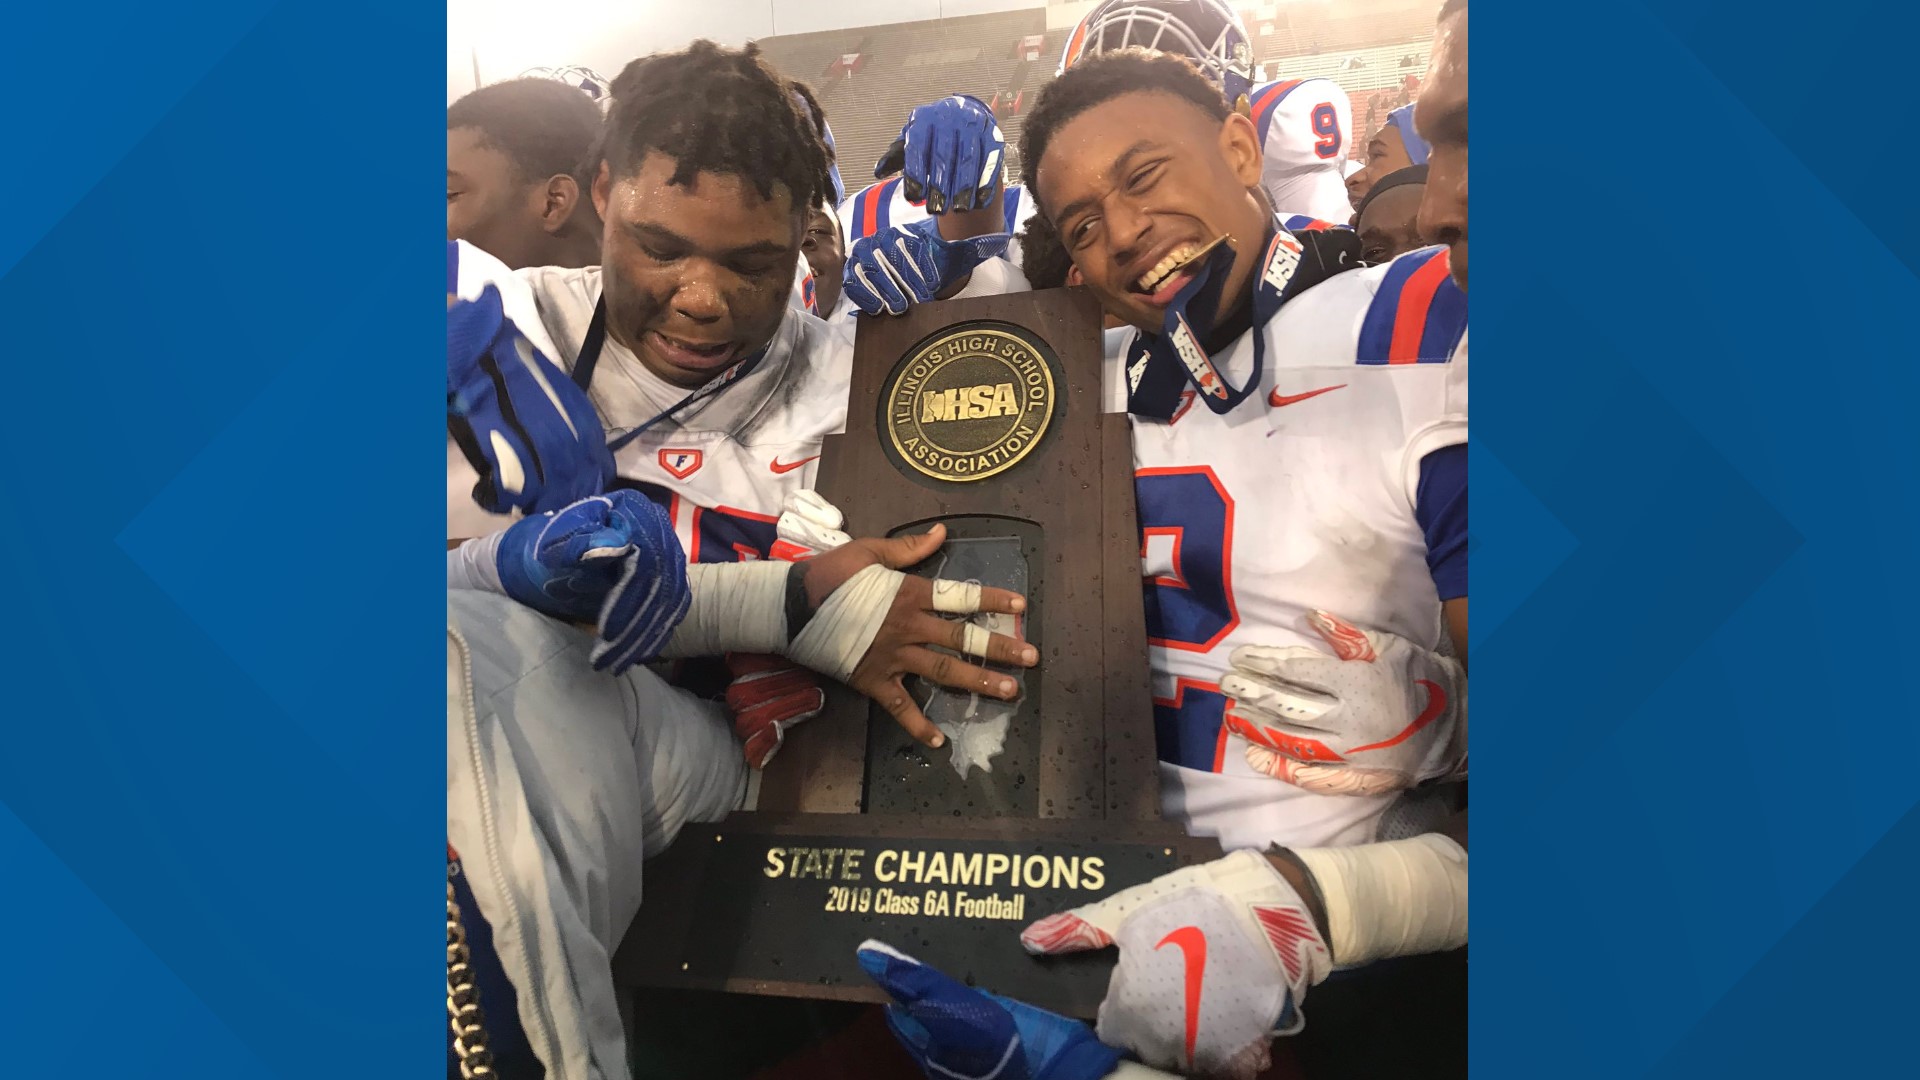 East St. Louis will play for state title in Champaign IL